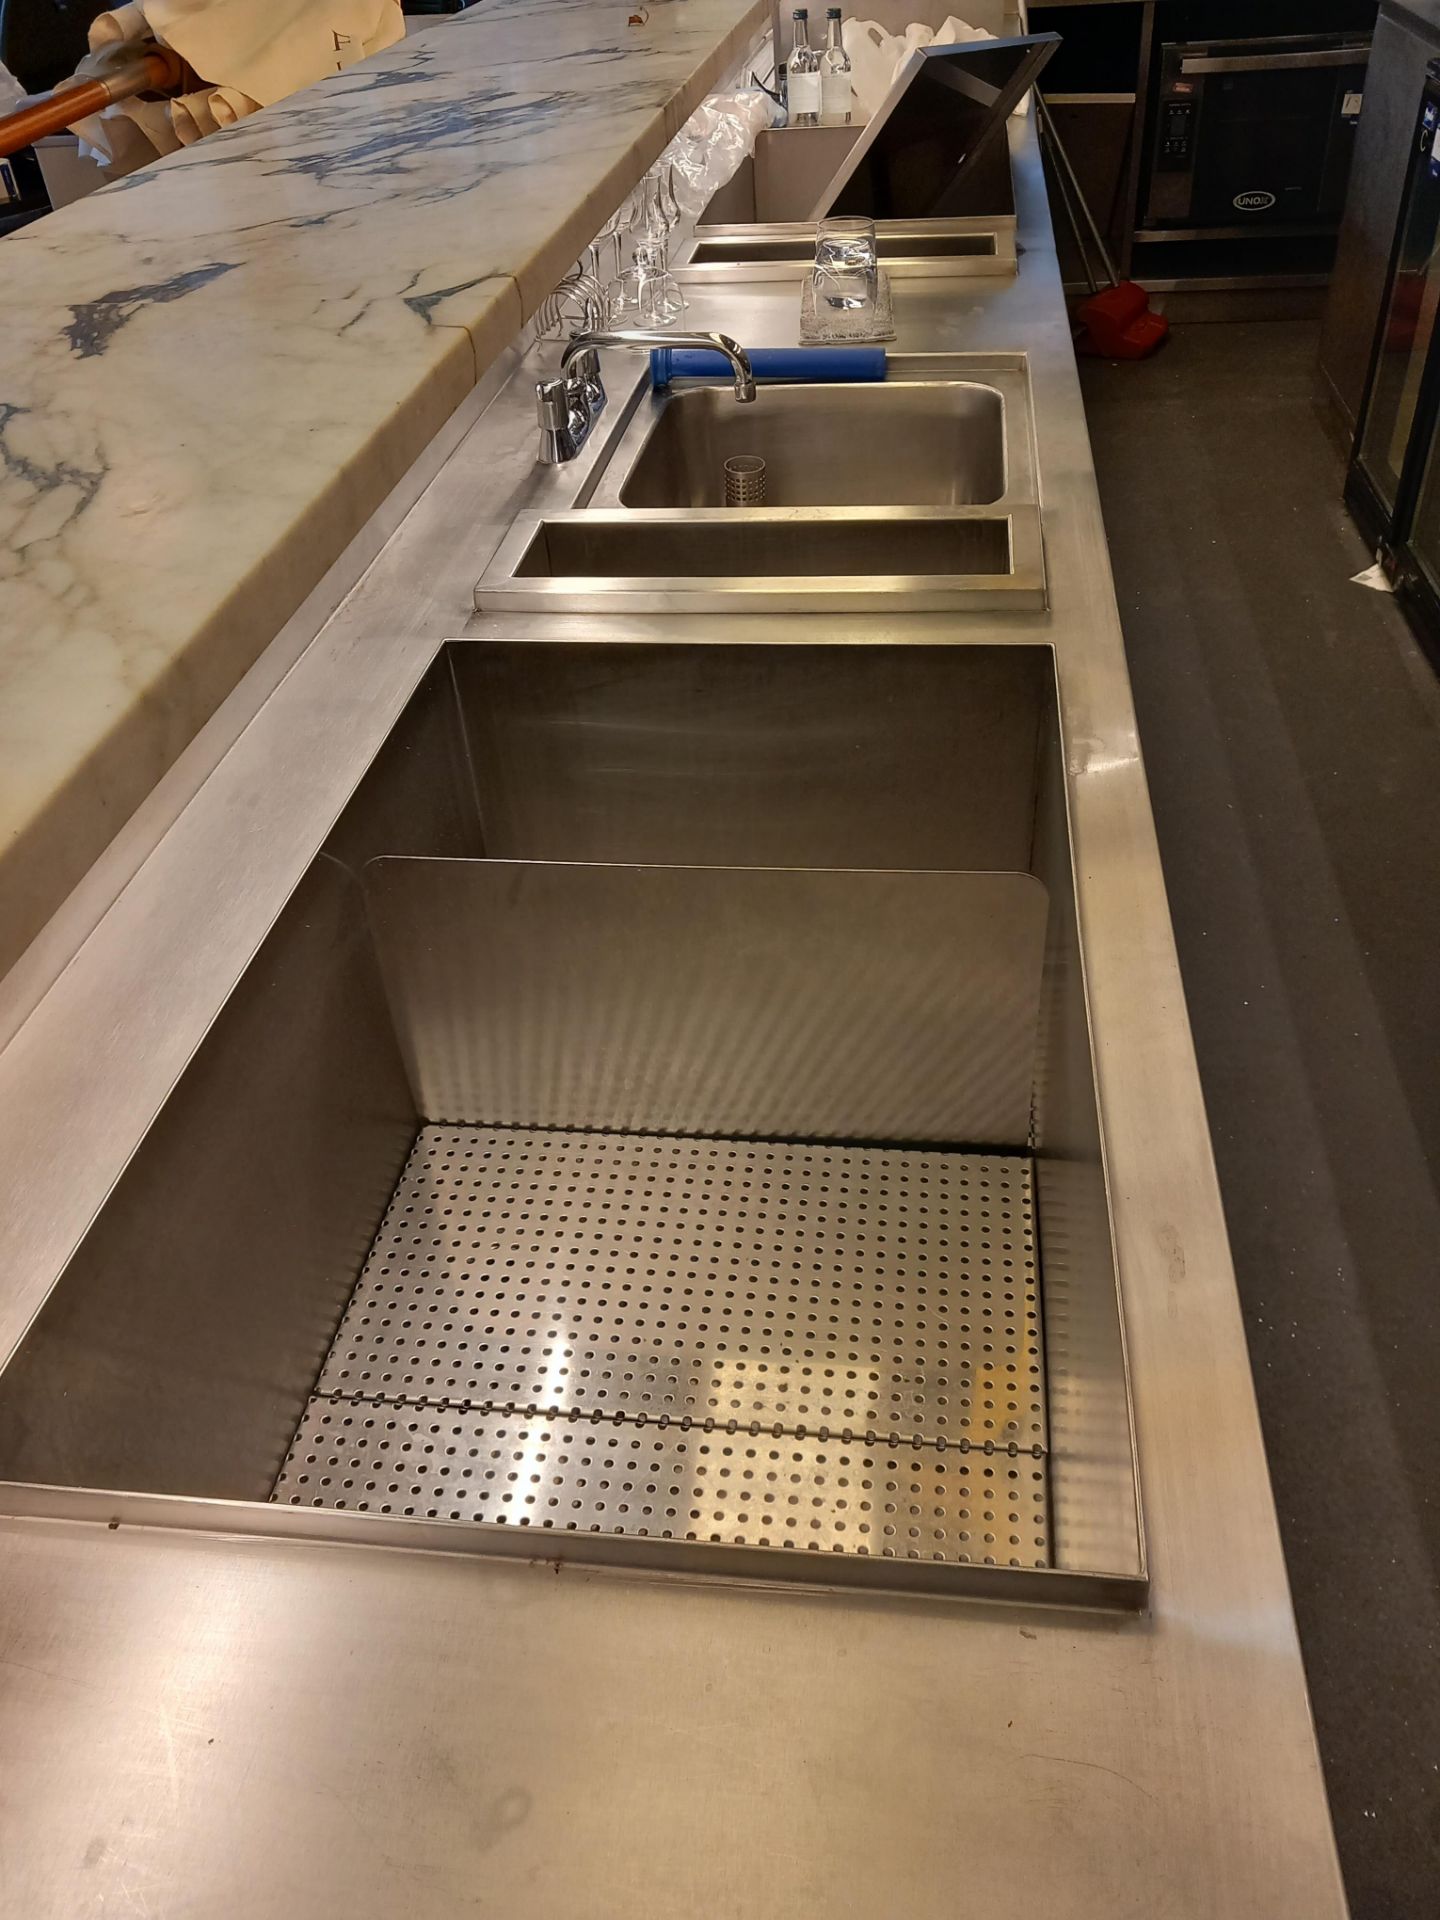 Stainless steel ‘L’ shaped bar unit approx. 8000mm - Image 6 of 21